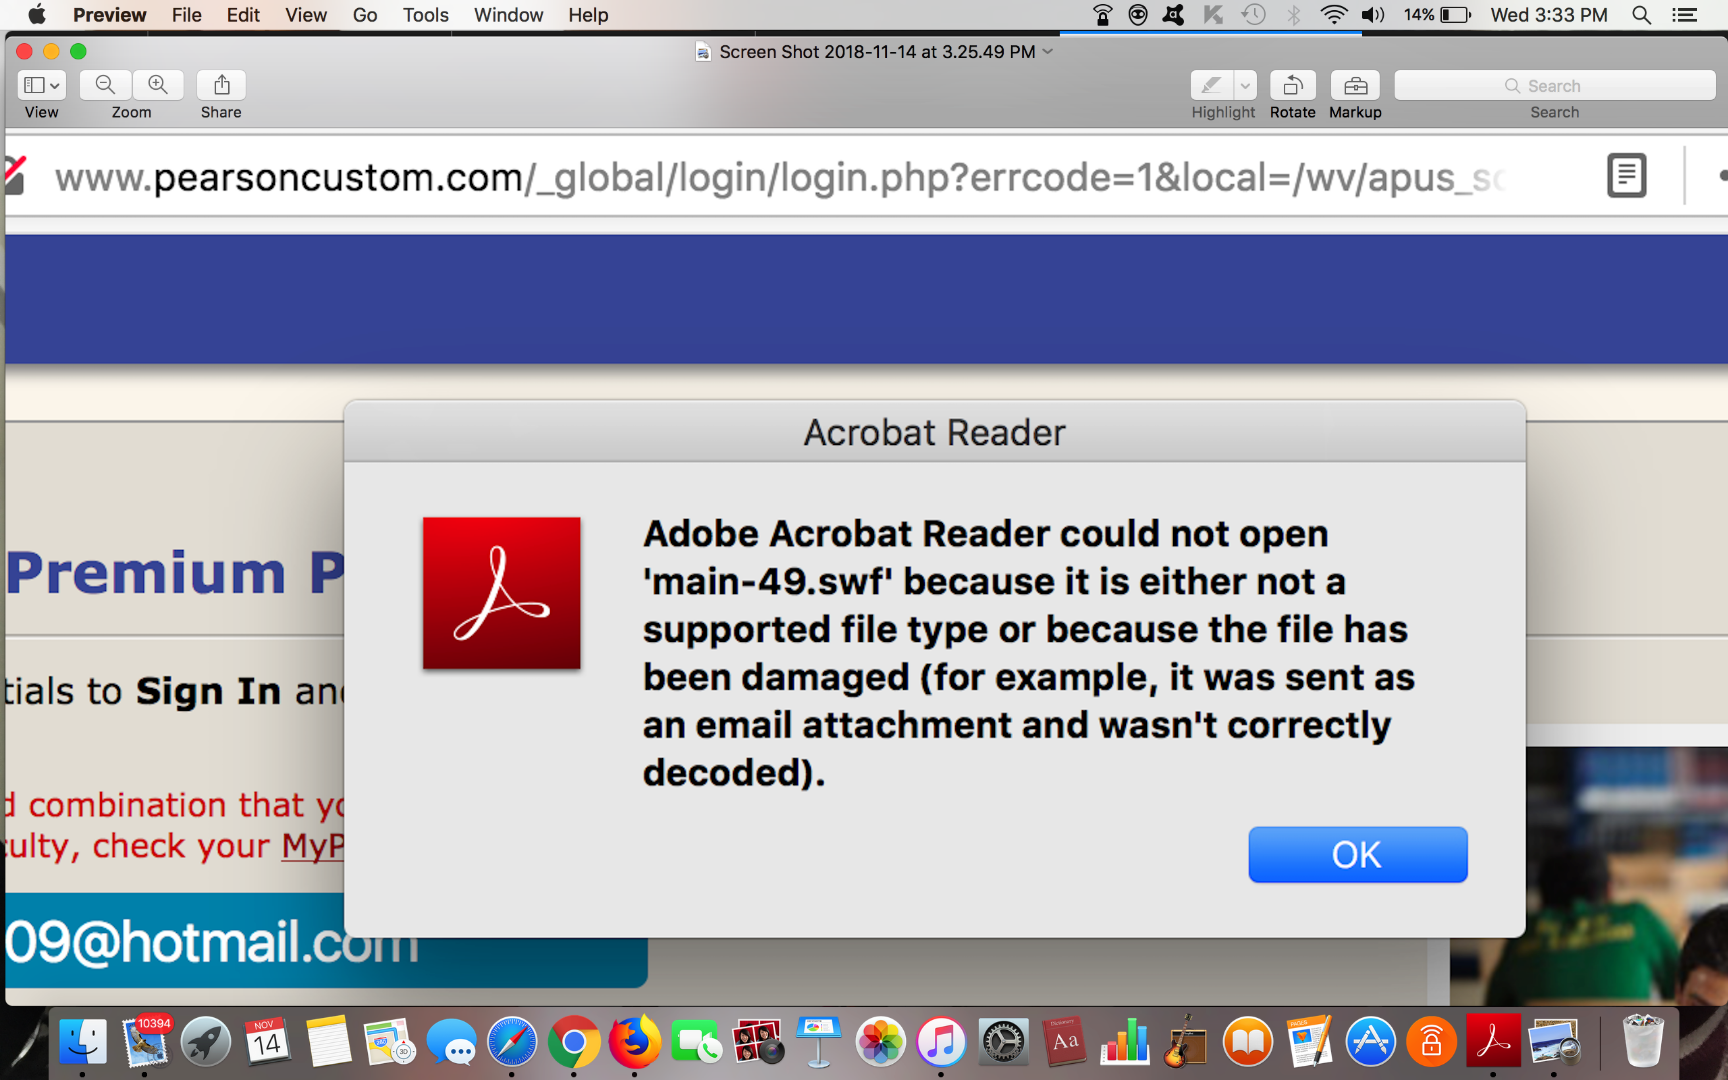 download acrobat reader now all files are damaged